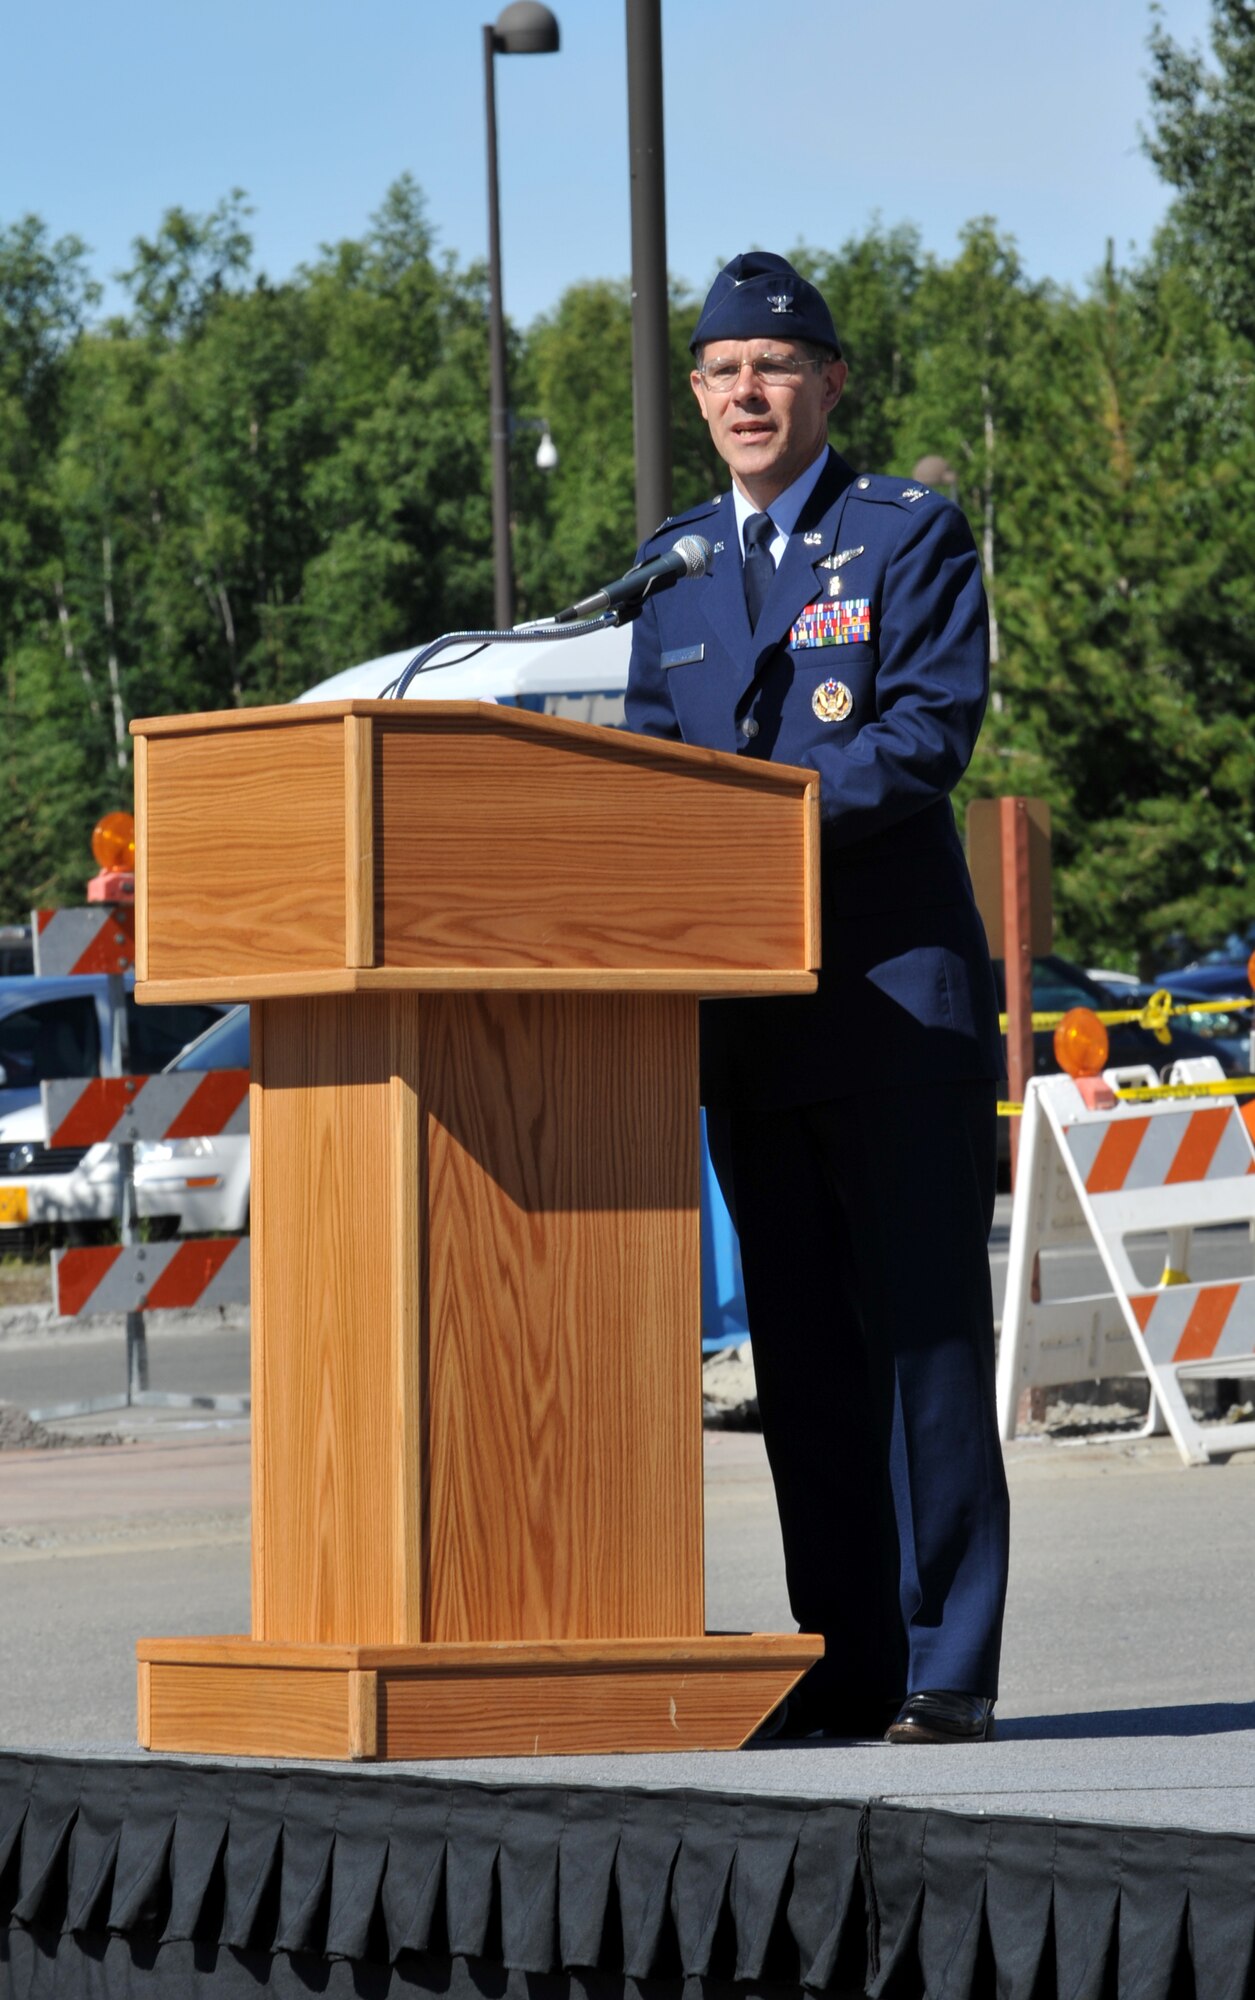 ELMENDORF AIR FORCE BASE, Alaska -- Col. Paul Friedichs, 3rd Medical Group commander, speaks to the attendants of the 3rd Medical Group change of command ceremony. The 3rd Medical Group is the primary Air Force referral center for the Pacific Theater. (U.S. Air Force photo/Airman 1st Class Tinese Treadwell)